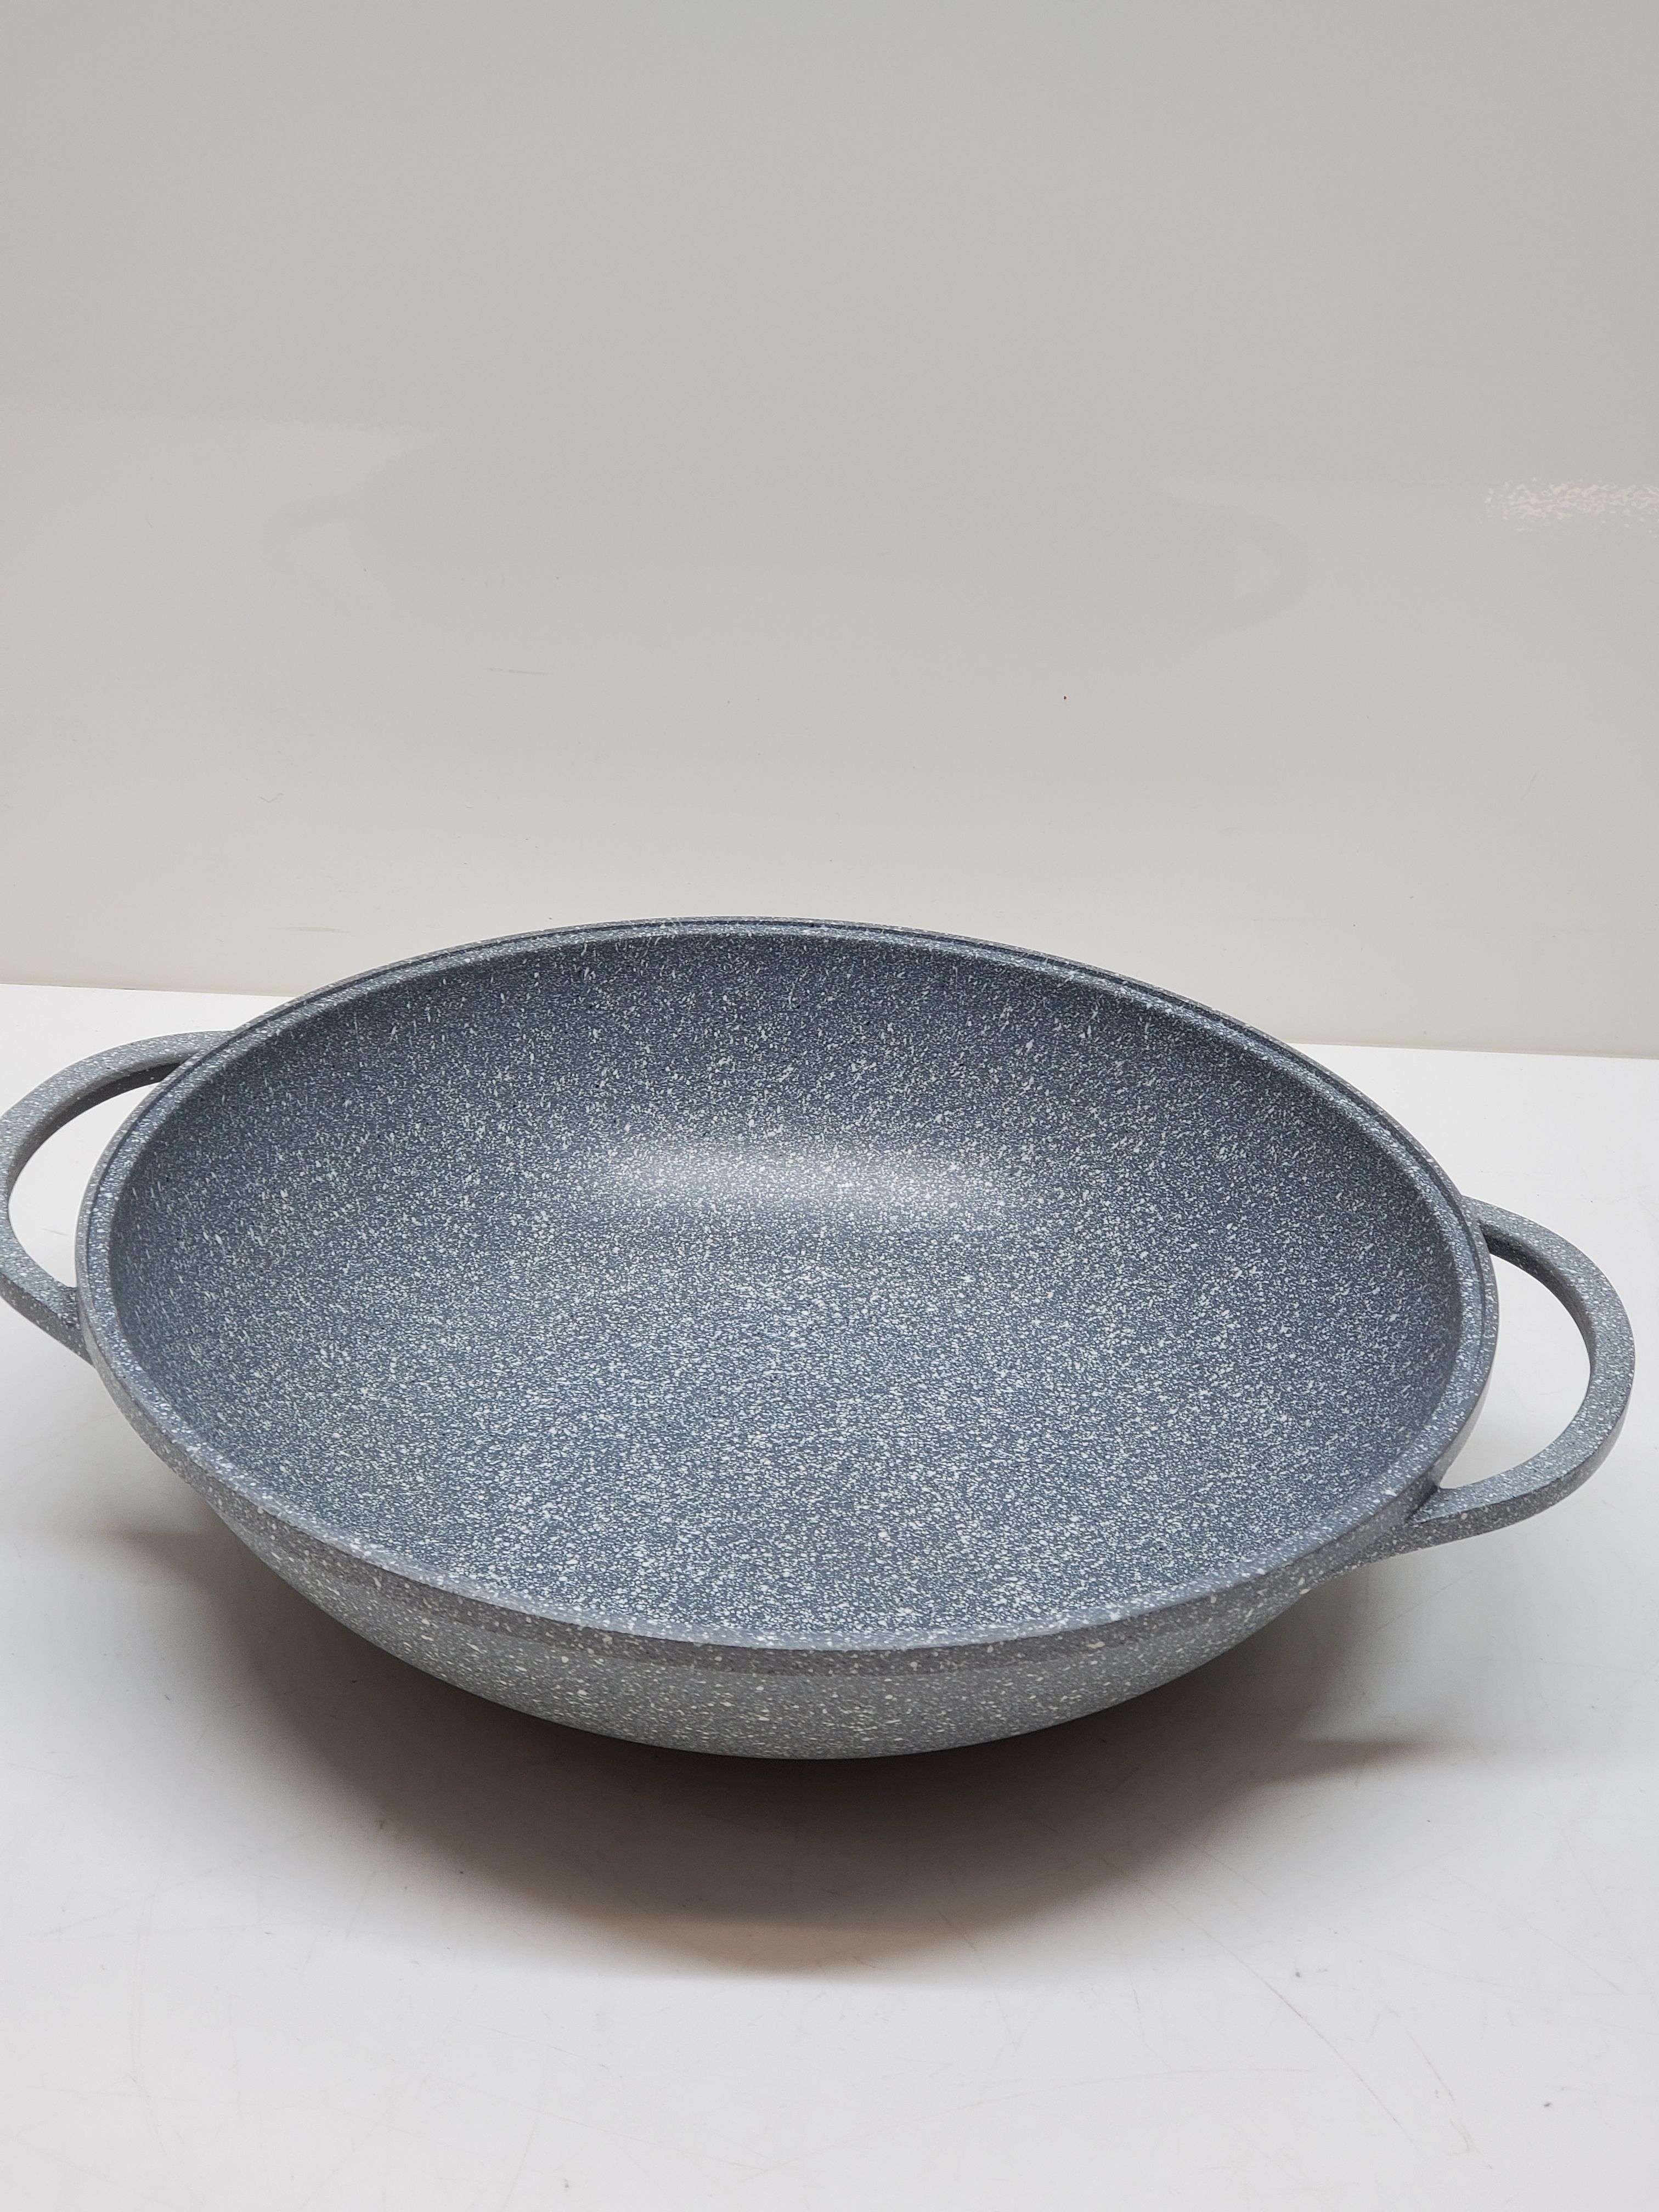 Deane and White Cookware - Official Online Store